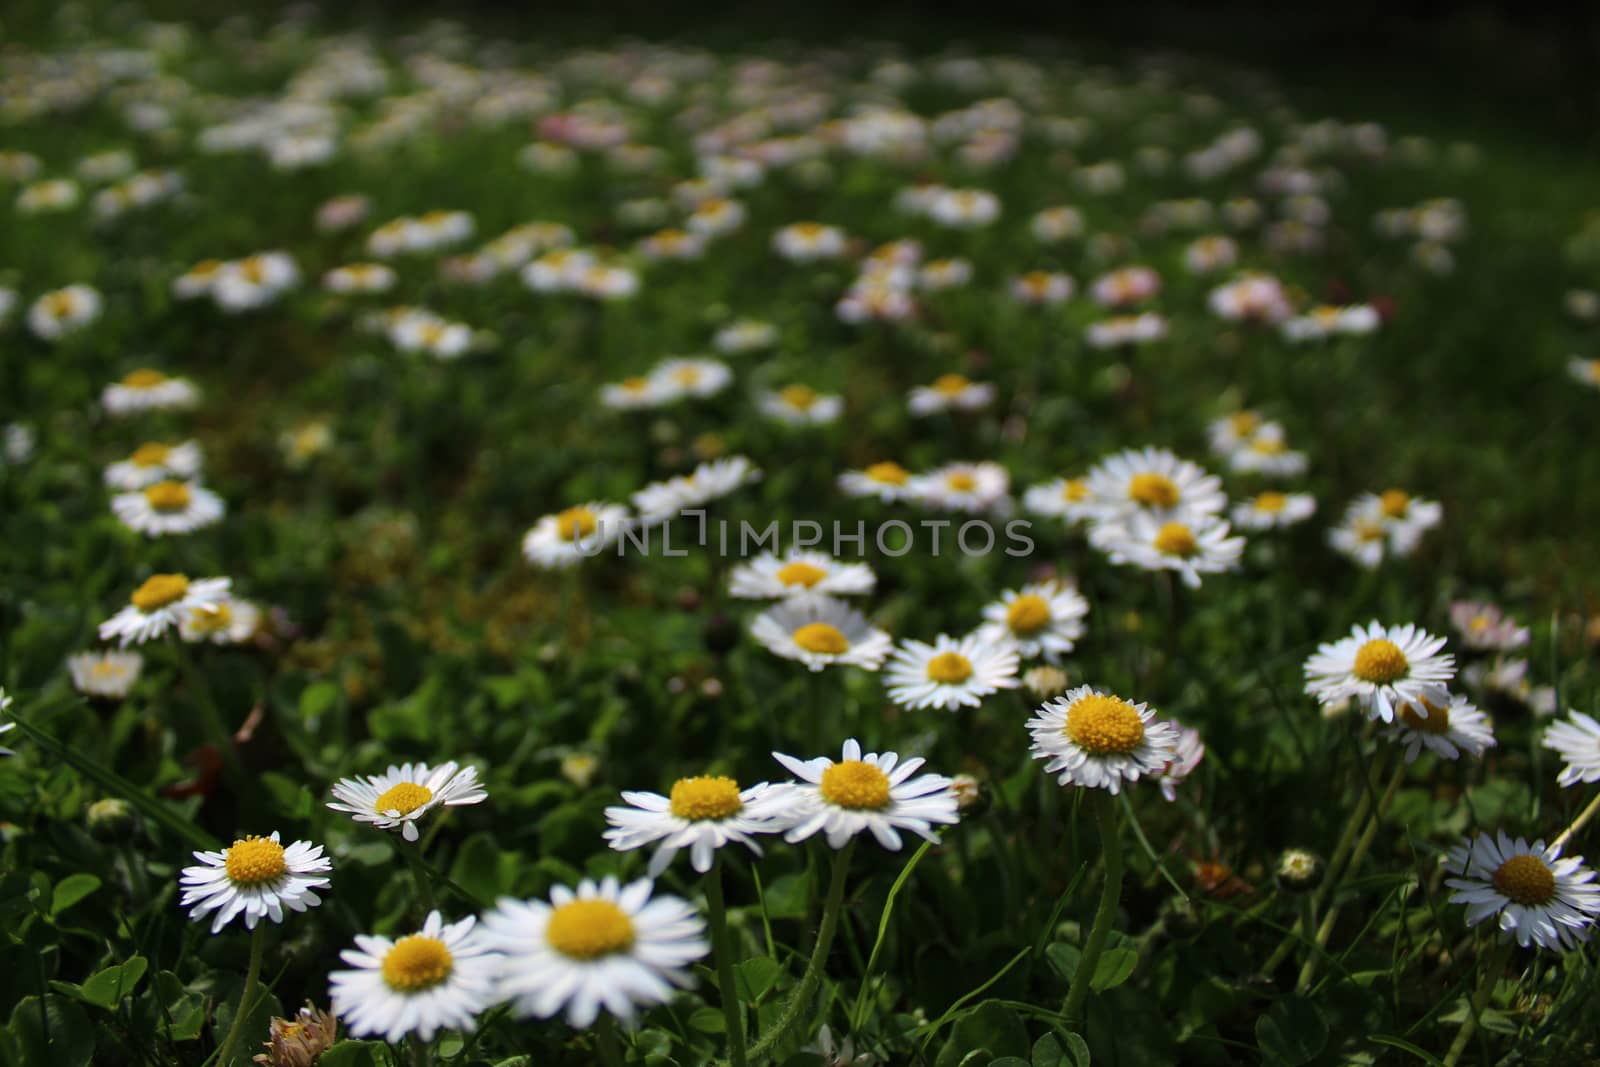 The picture shows a meadow with daisies in summer.